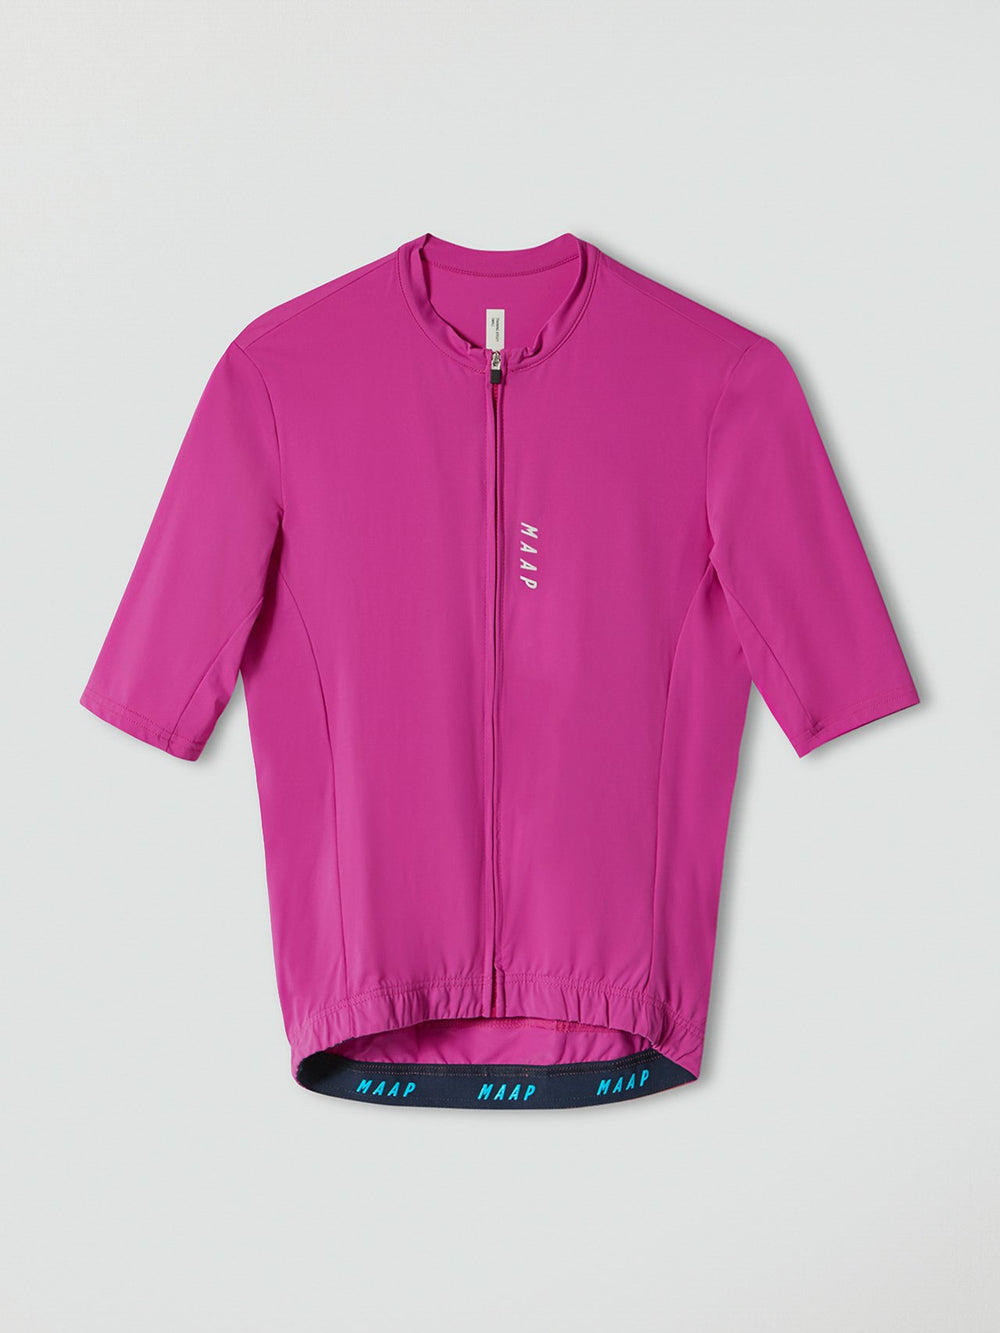 Product Image for Women's Training Jersey